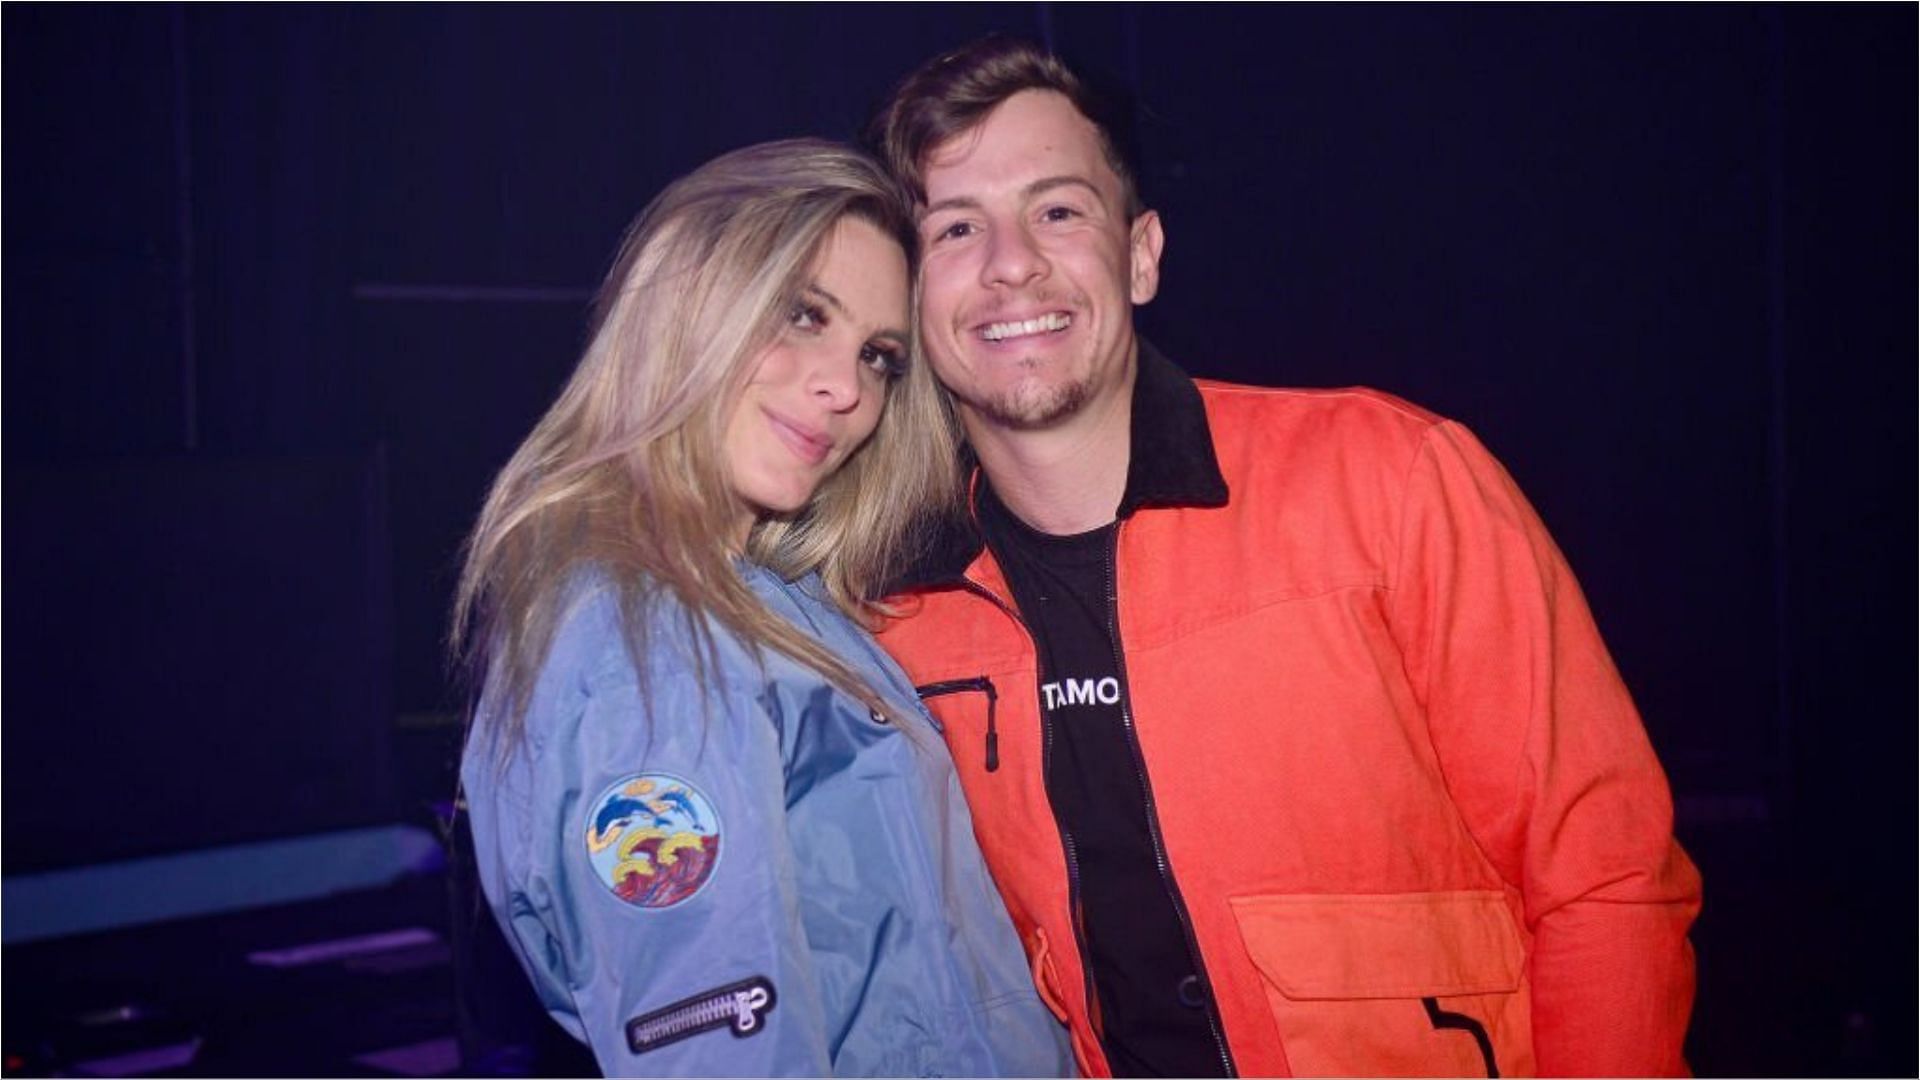 Lele Pons and Guaynaa have recently exchanged vows (Image via Johnny Louis/Getty Images)